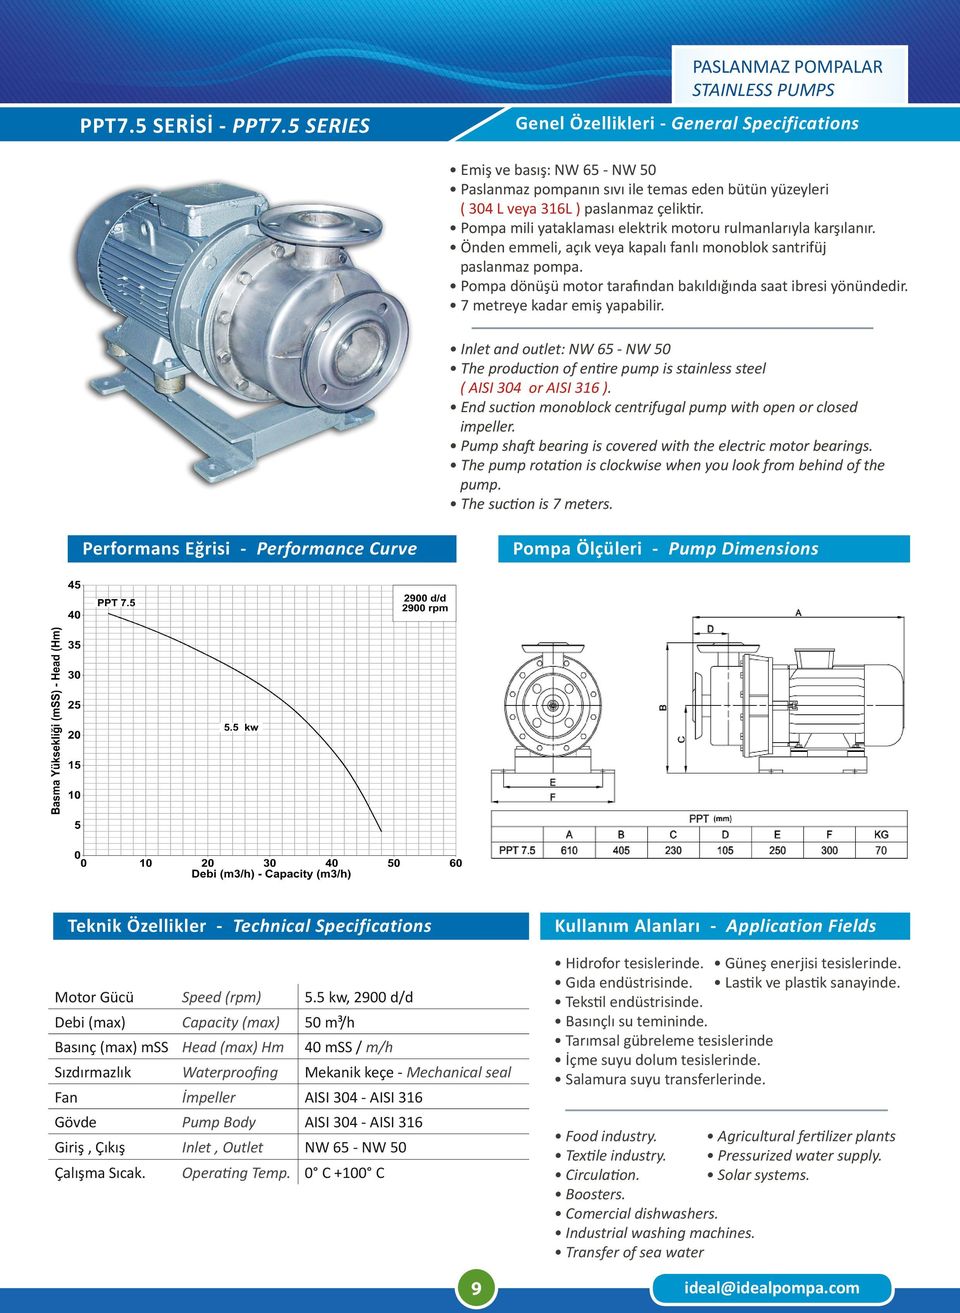 End suction monoblock centrifugal pump with open or closed impeller. Pump shaft bearing is covered with the electric motor bearings.